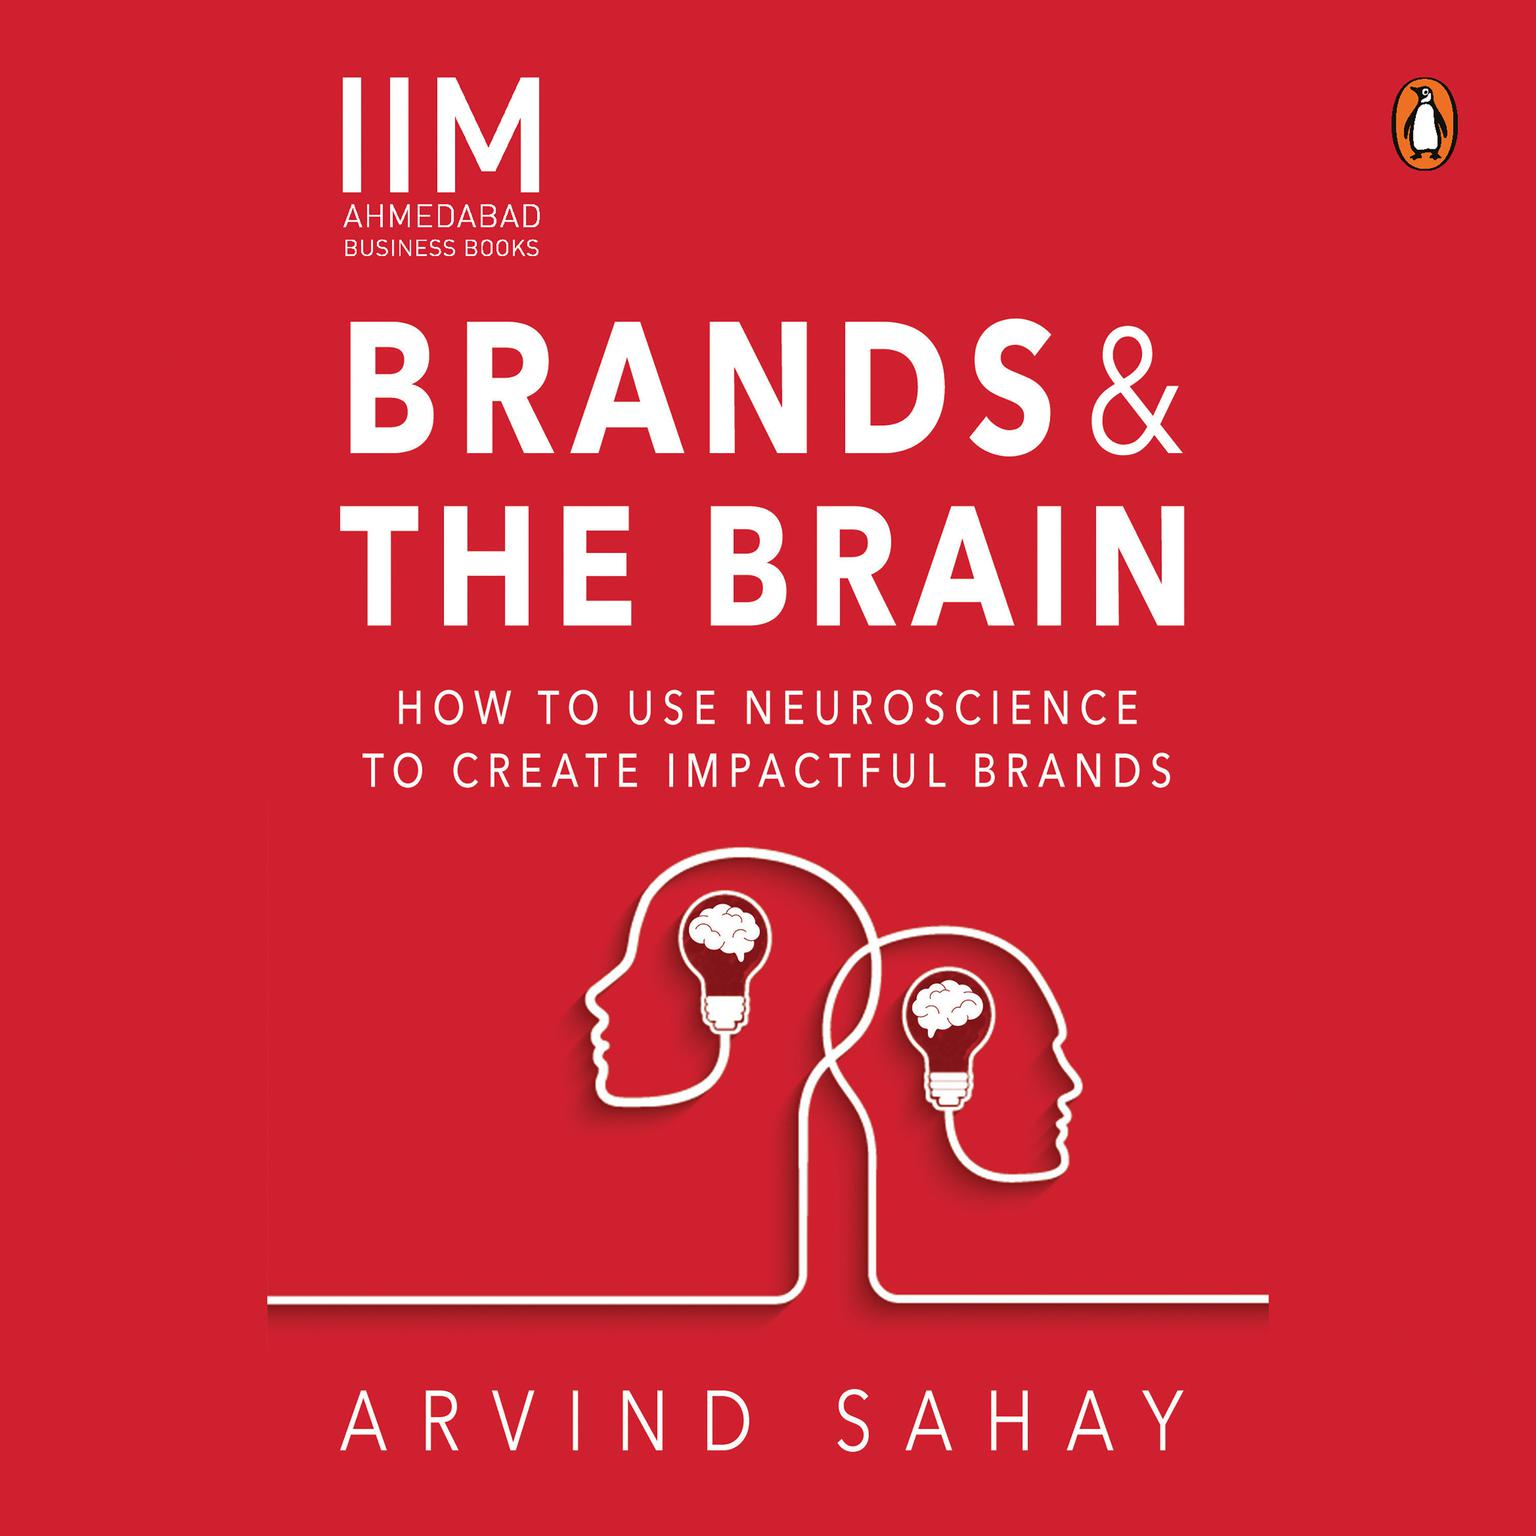 Brands and the Brain: How to Use Neuroscience to Create Impactful Brands: How to Use Neuroscience to Create Impactful Brands Audiobook, by Aravind Sahay